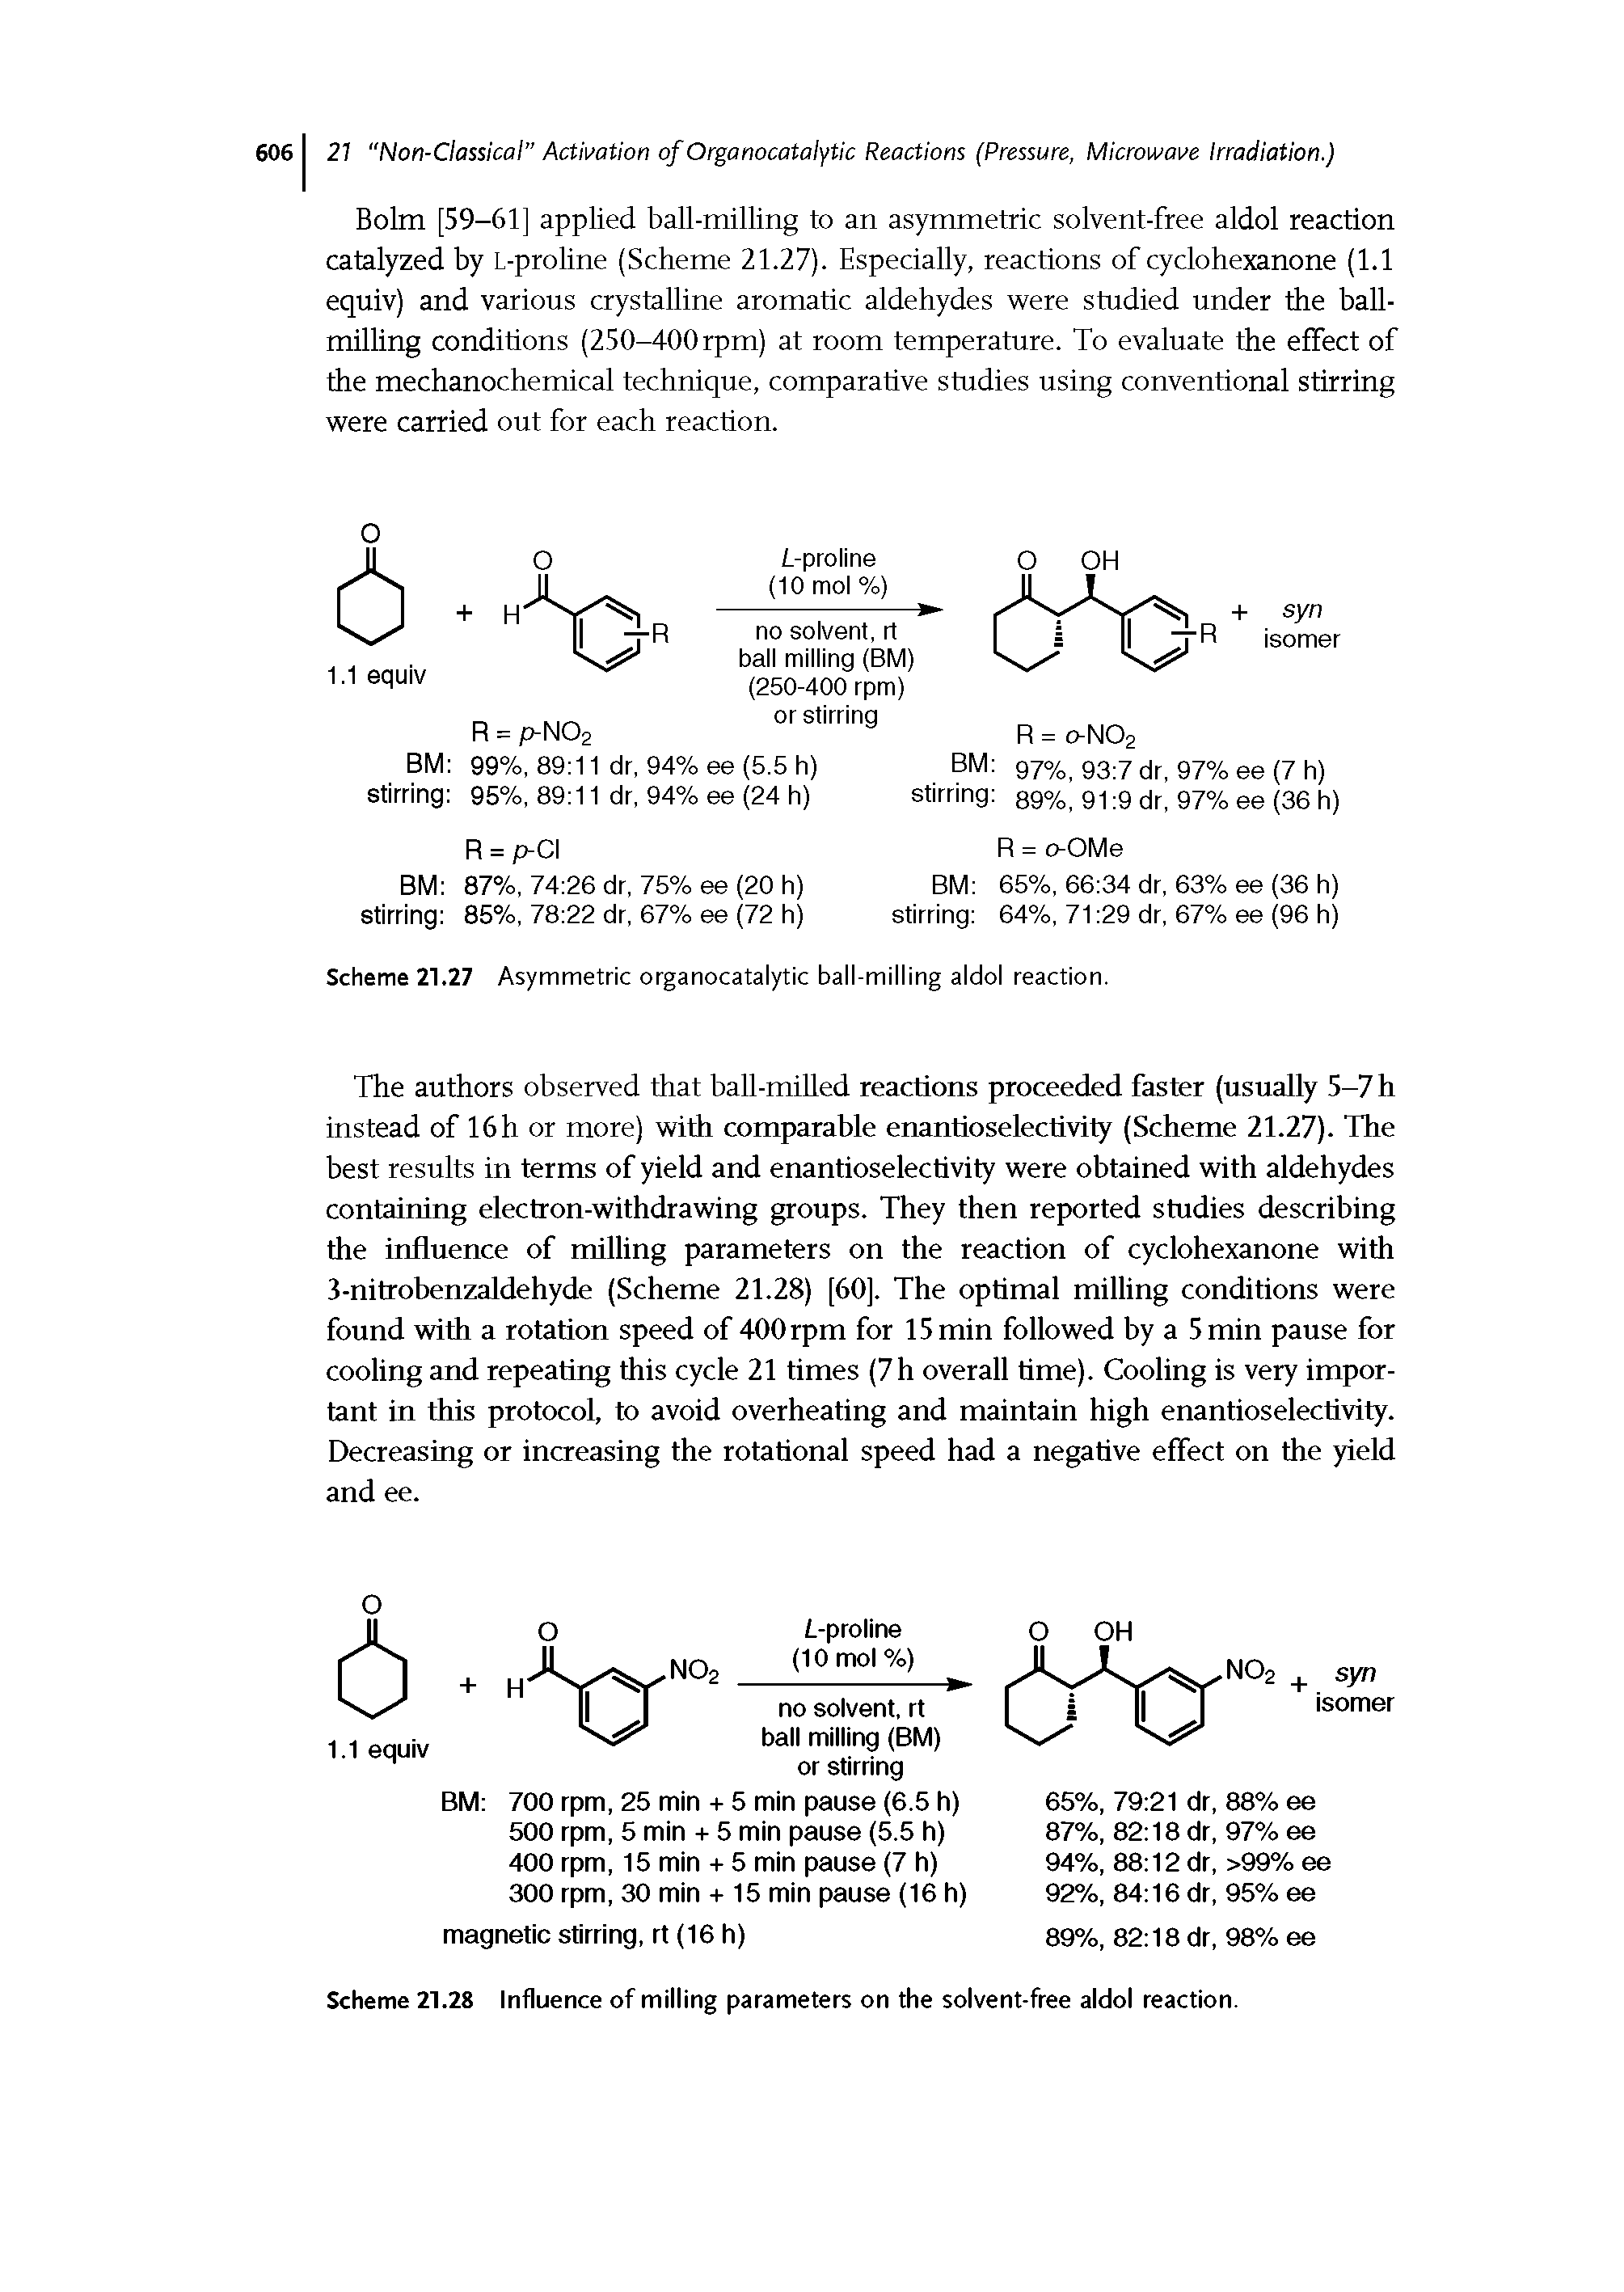 Scheme 21.28 Influence of milling parameters on the solvent-free aldol reaction.